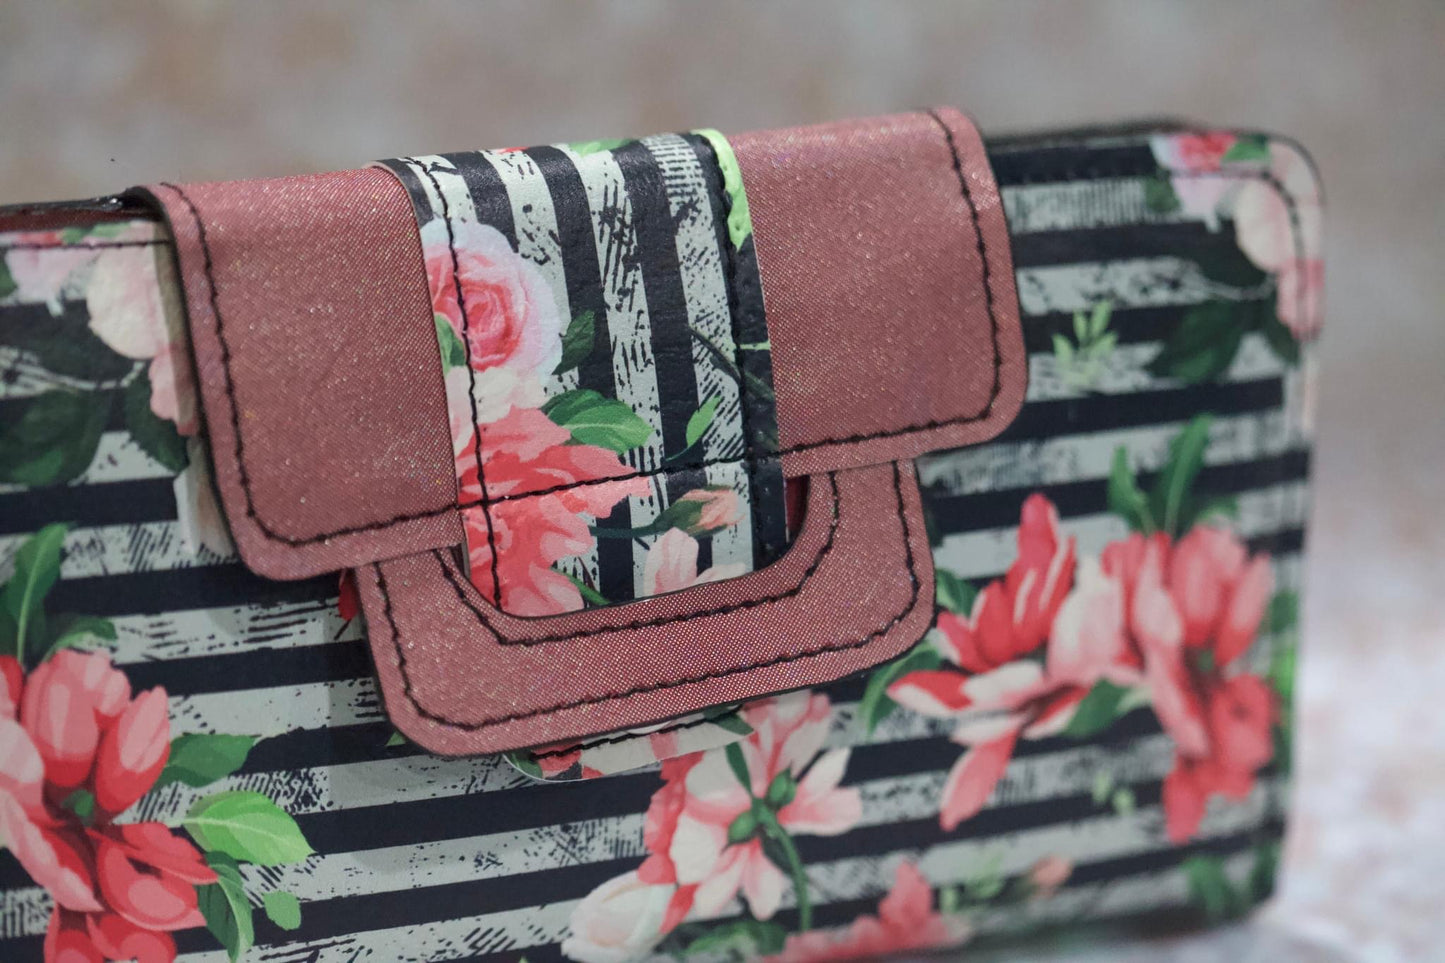 Faith Clutch PDF sewing pattern (includes SVGs)